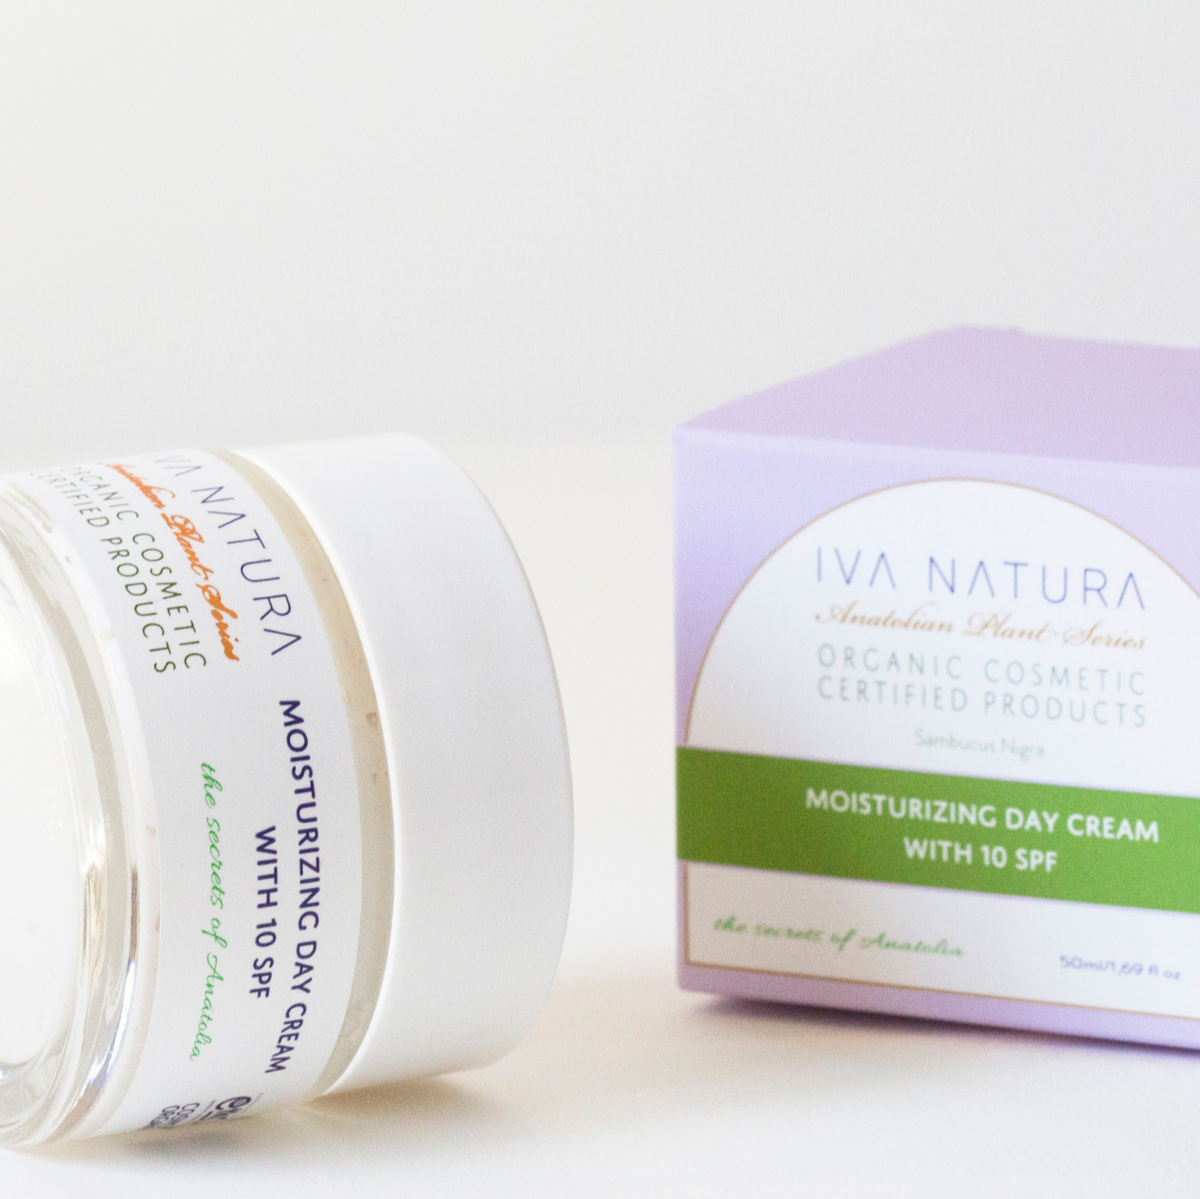 Moisturizing day cream with sun protection  made from all  natural and chemical free ingredients